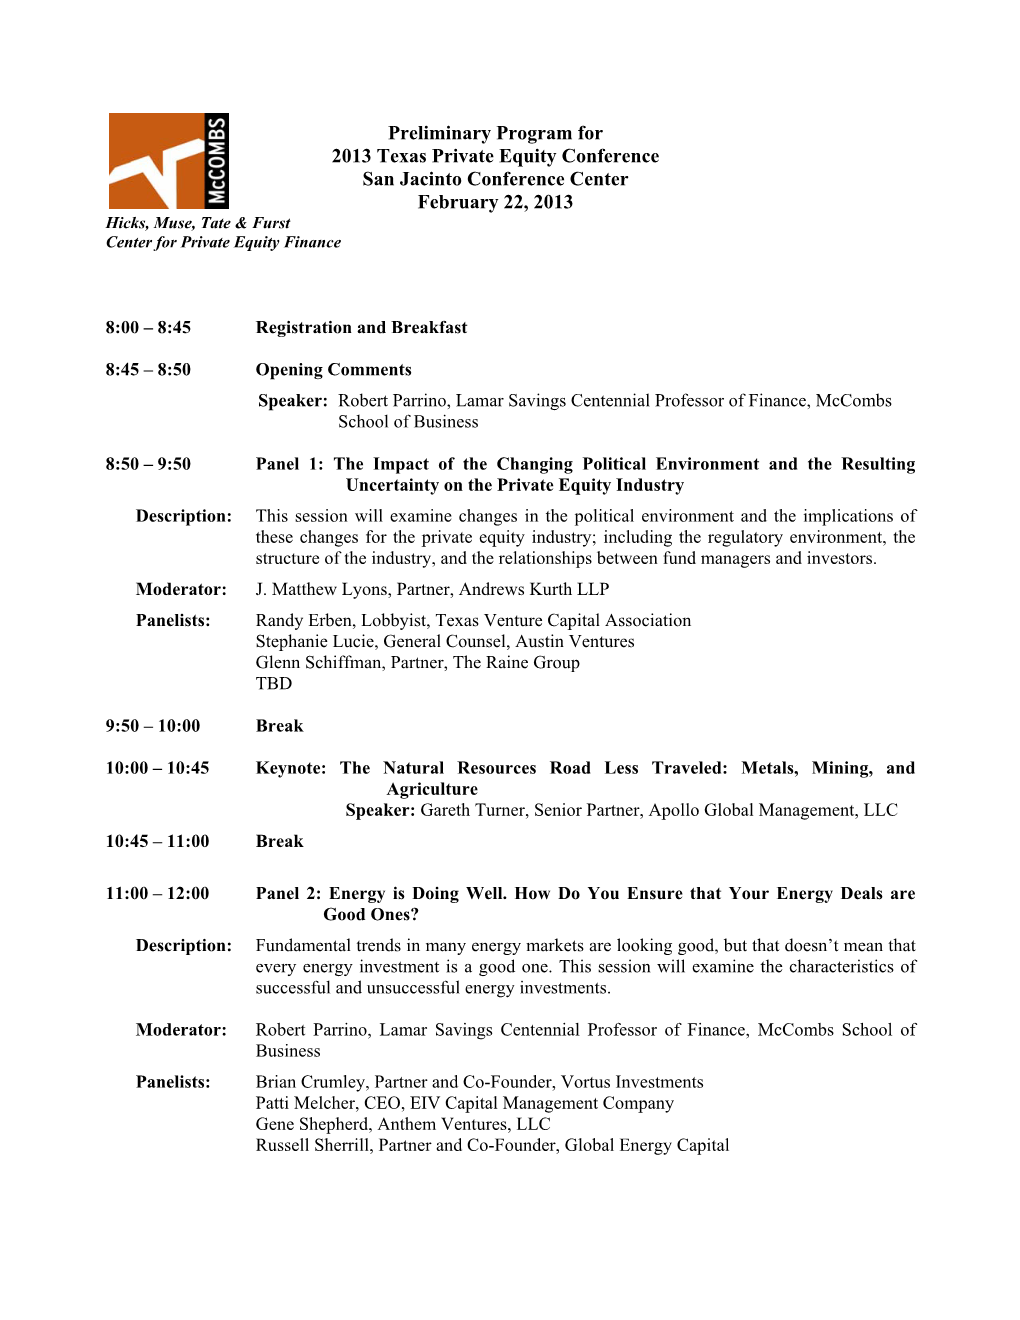 Preliminary Program for 2013 Texas Private Equity Conference San